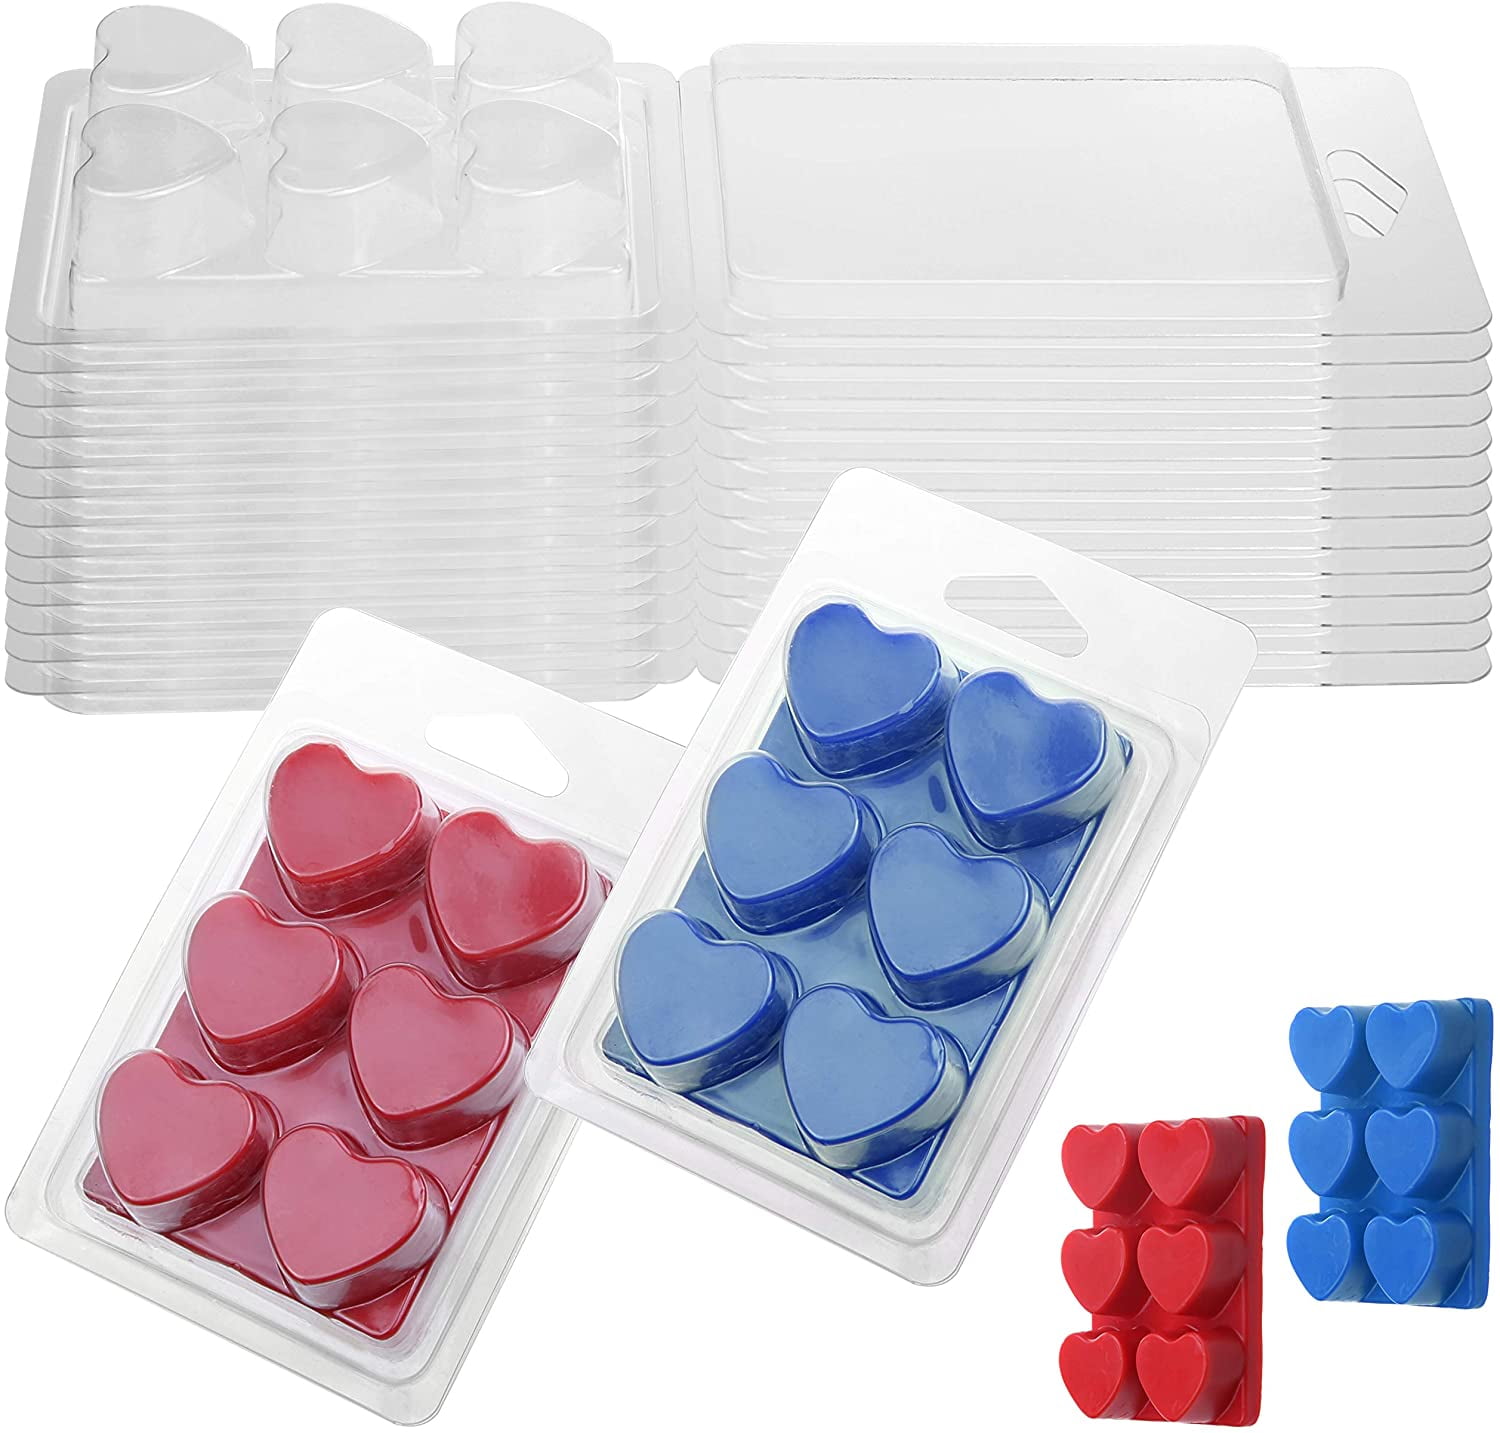 EUPNHY Wax Melt Containers-8 Cavity Clear Empty Plastic Wax Melt Molds-25 Packs Cubes Clamshells for Tarts Wax Melts.